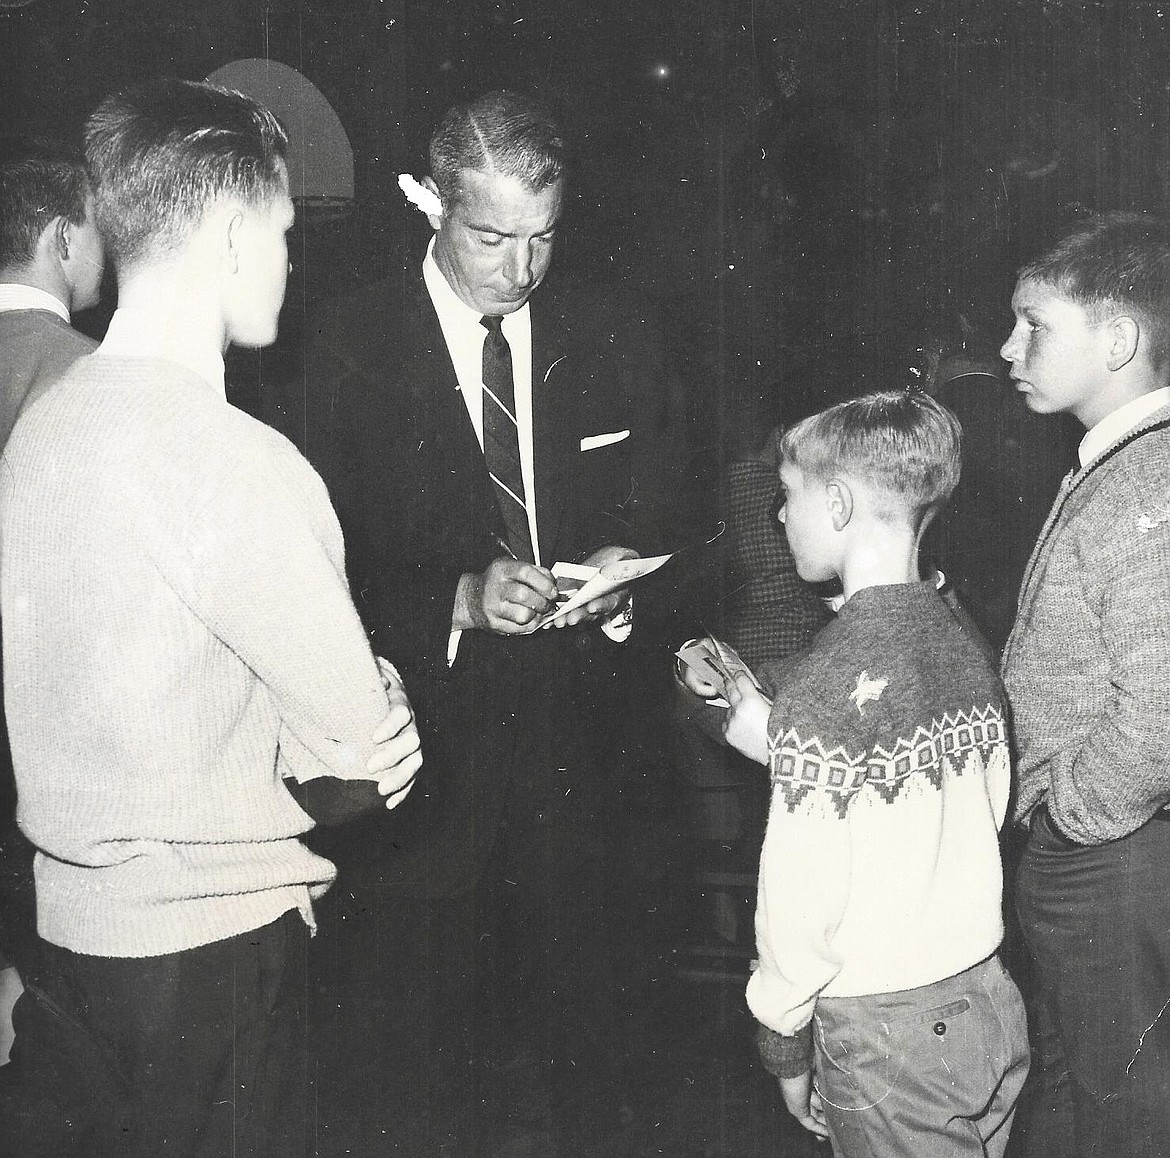 George Emmett of Coeur d’Alene, then 13, right, waits to get an autograph from New York Yankee great Joe DiMaggio.